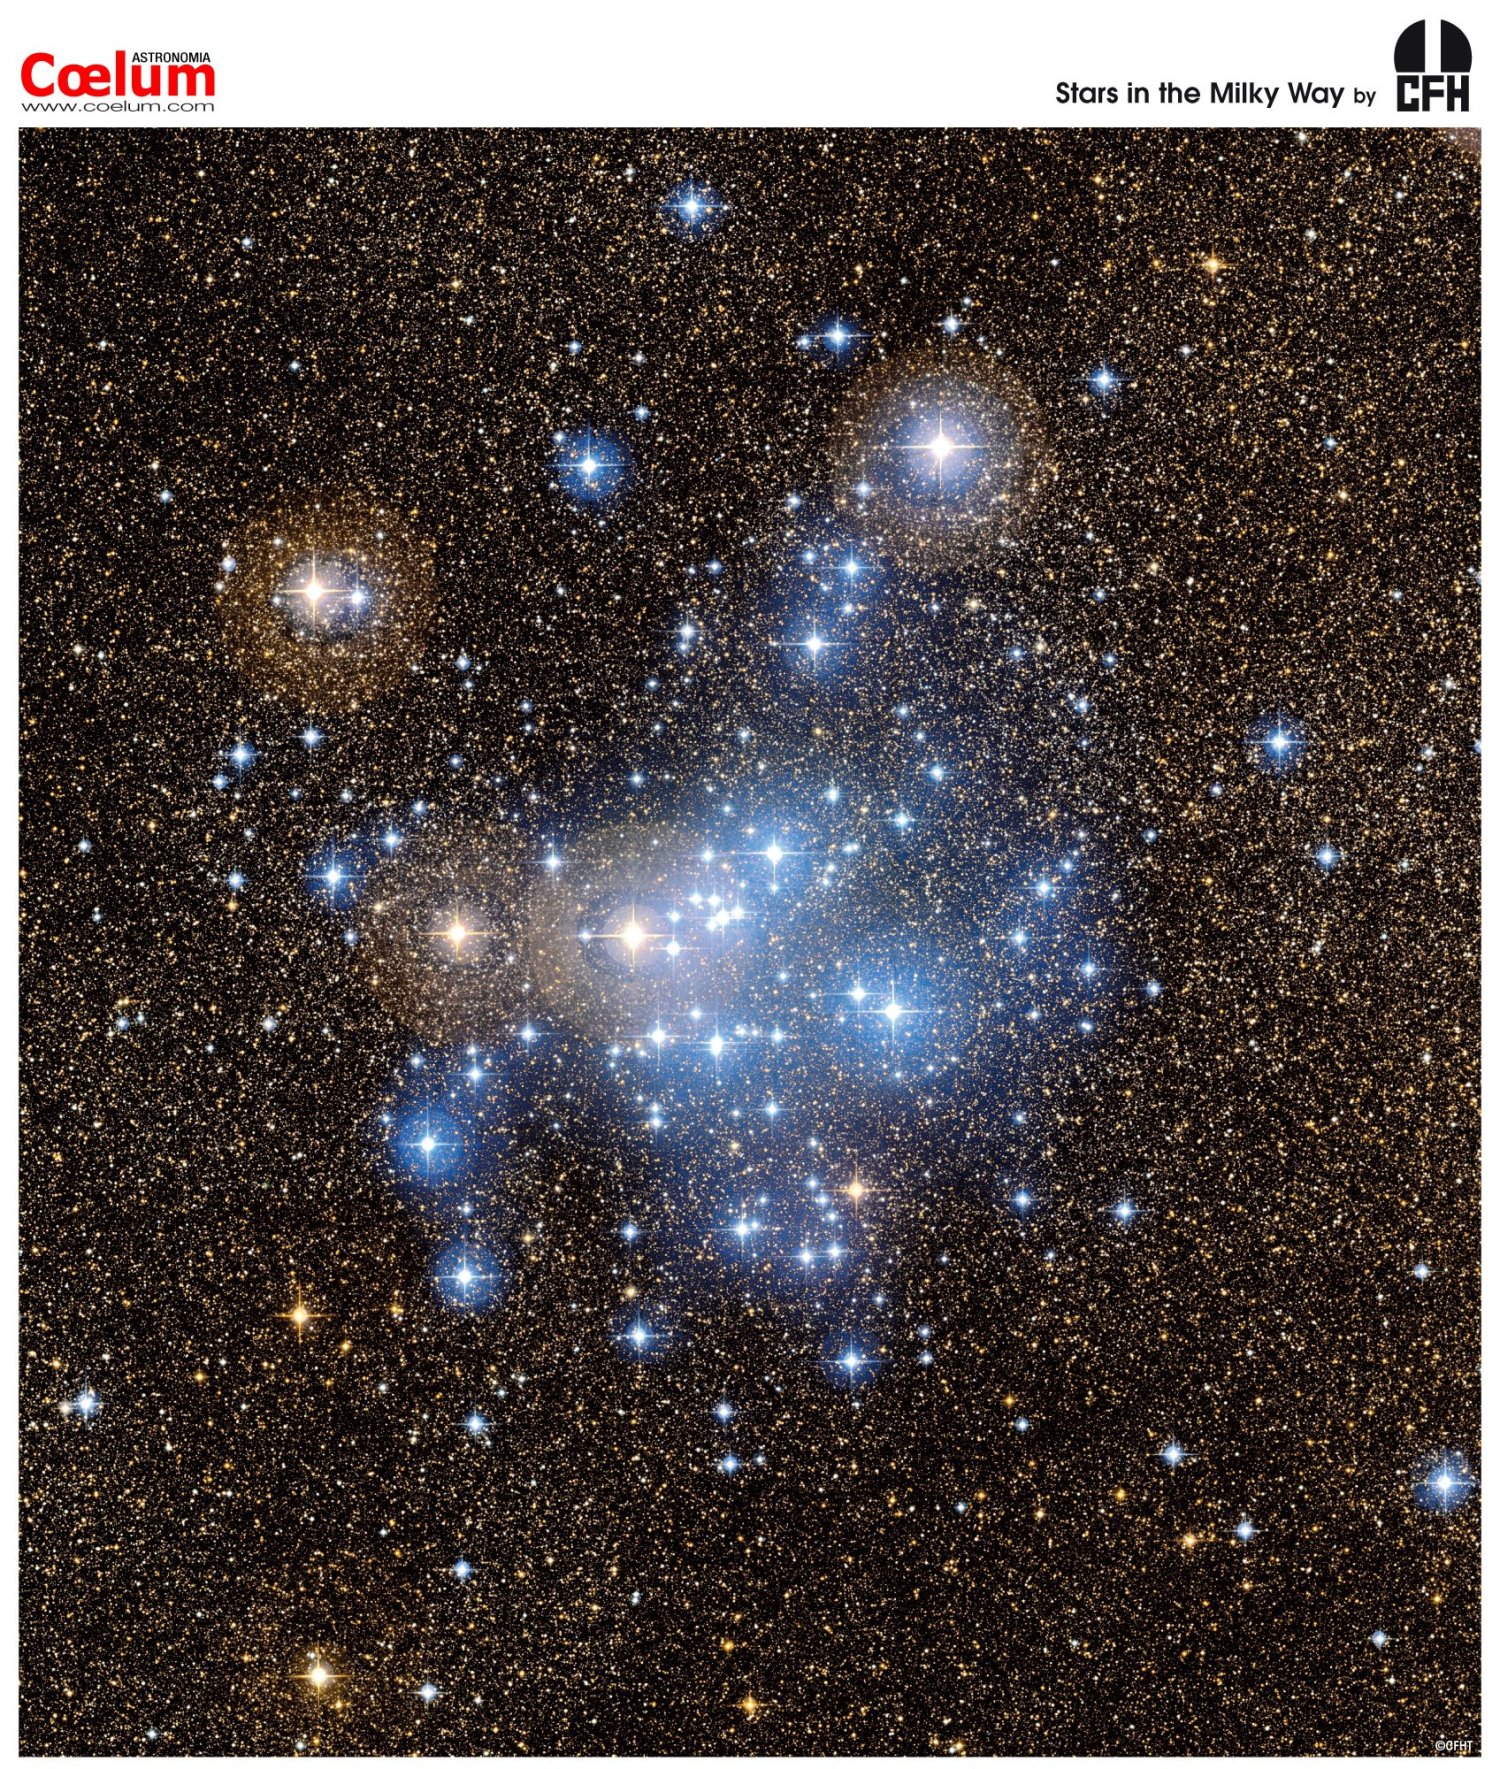 Open Cluster M25